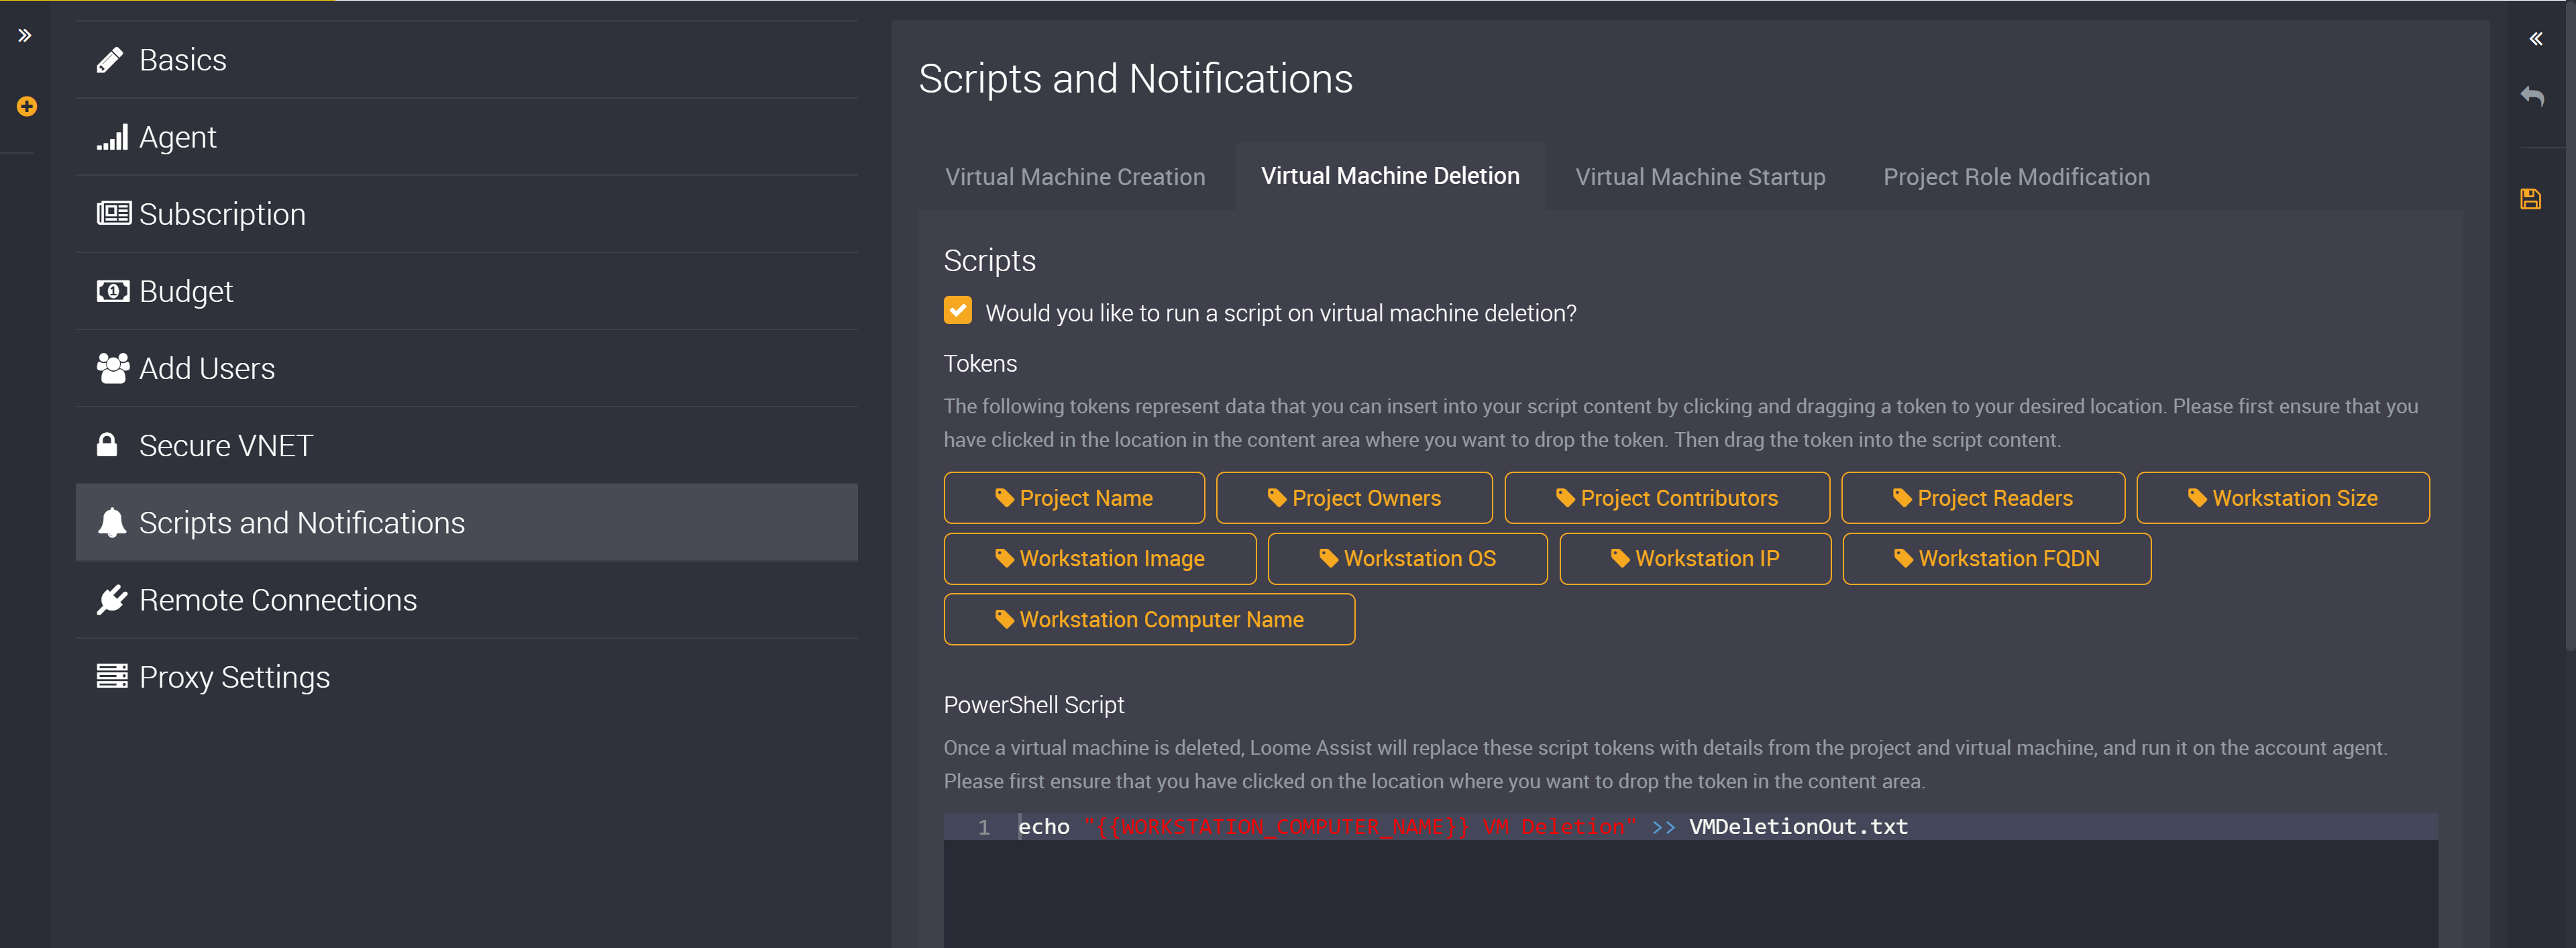 Scripts and notifications